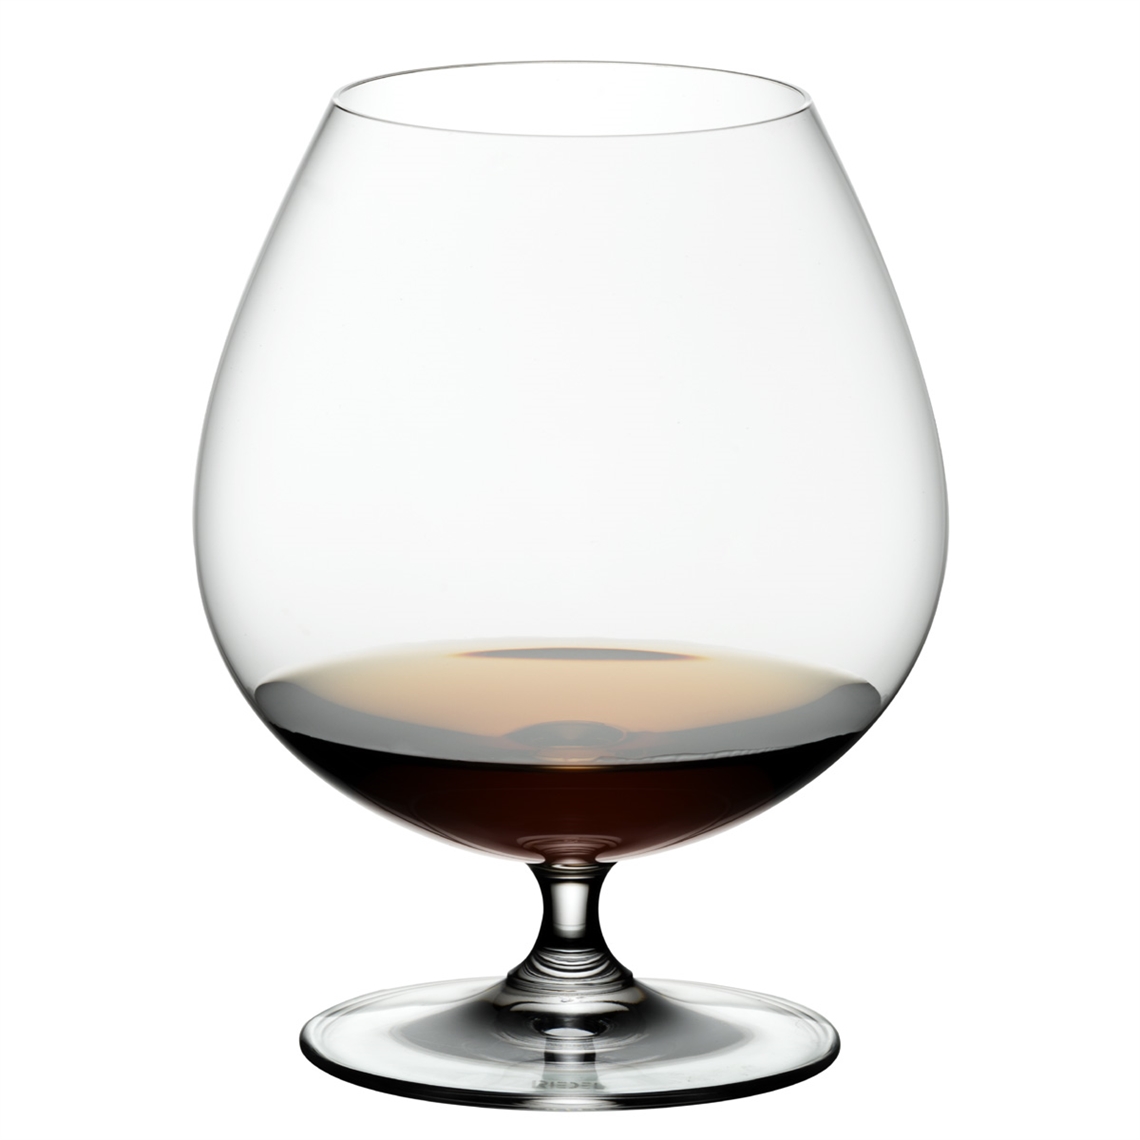 View more how to taste wine - a complete guide  from our Spirit Glasses range